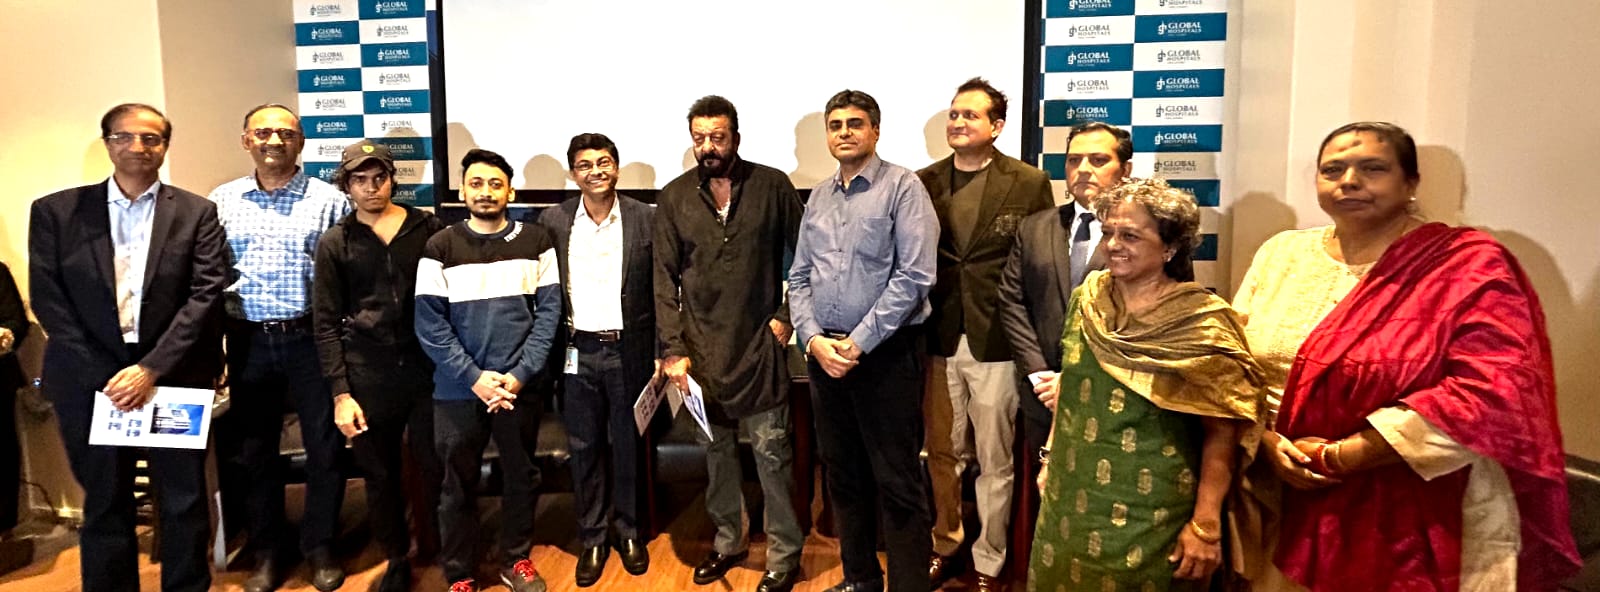 World Stroke Day 2023 was marked with a special tribute and book launch to Felicitate and Honor Stroke Survivors Resilience by Global Hospital, Lower Parel, Mumbai and Bollywood Star Sanjay Dutt - Photo By GPN 